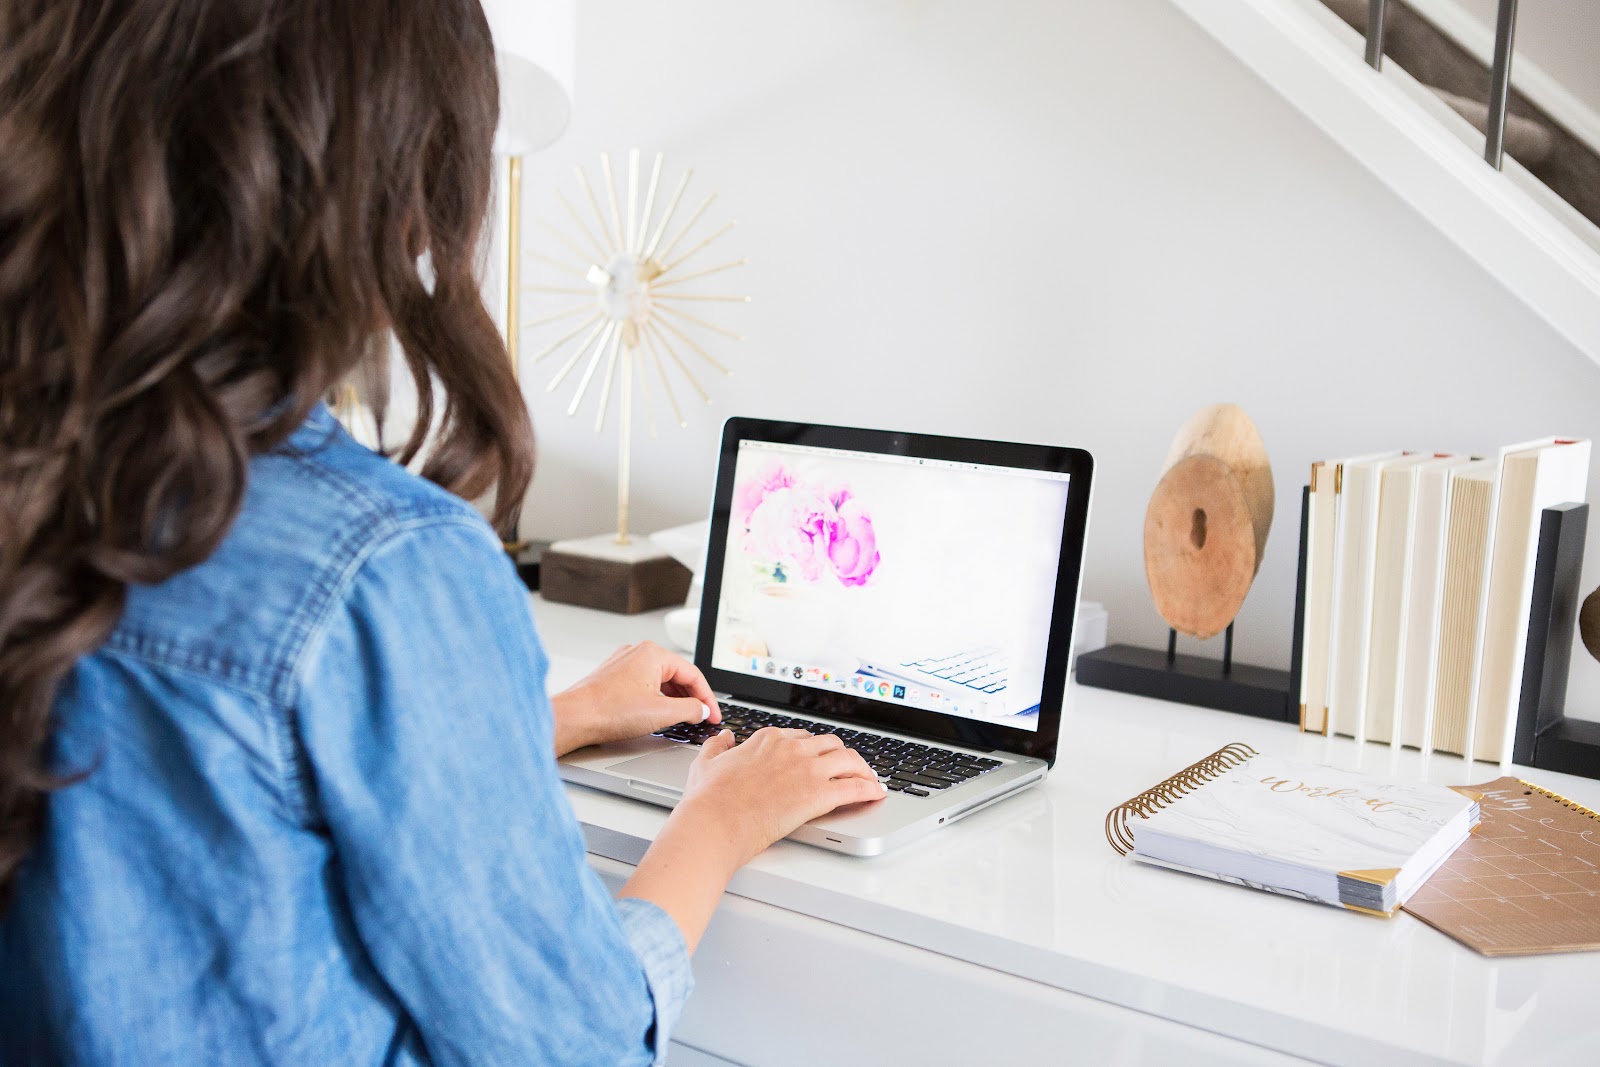 Need to work from home and thinking about freelancing online? Here are 5 simple steps you can take to start a freelancing side-hustle online!